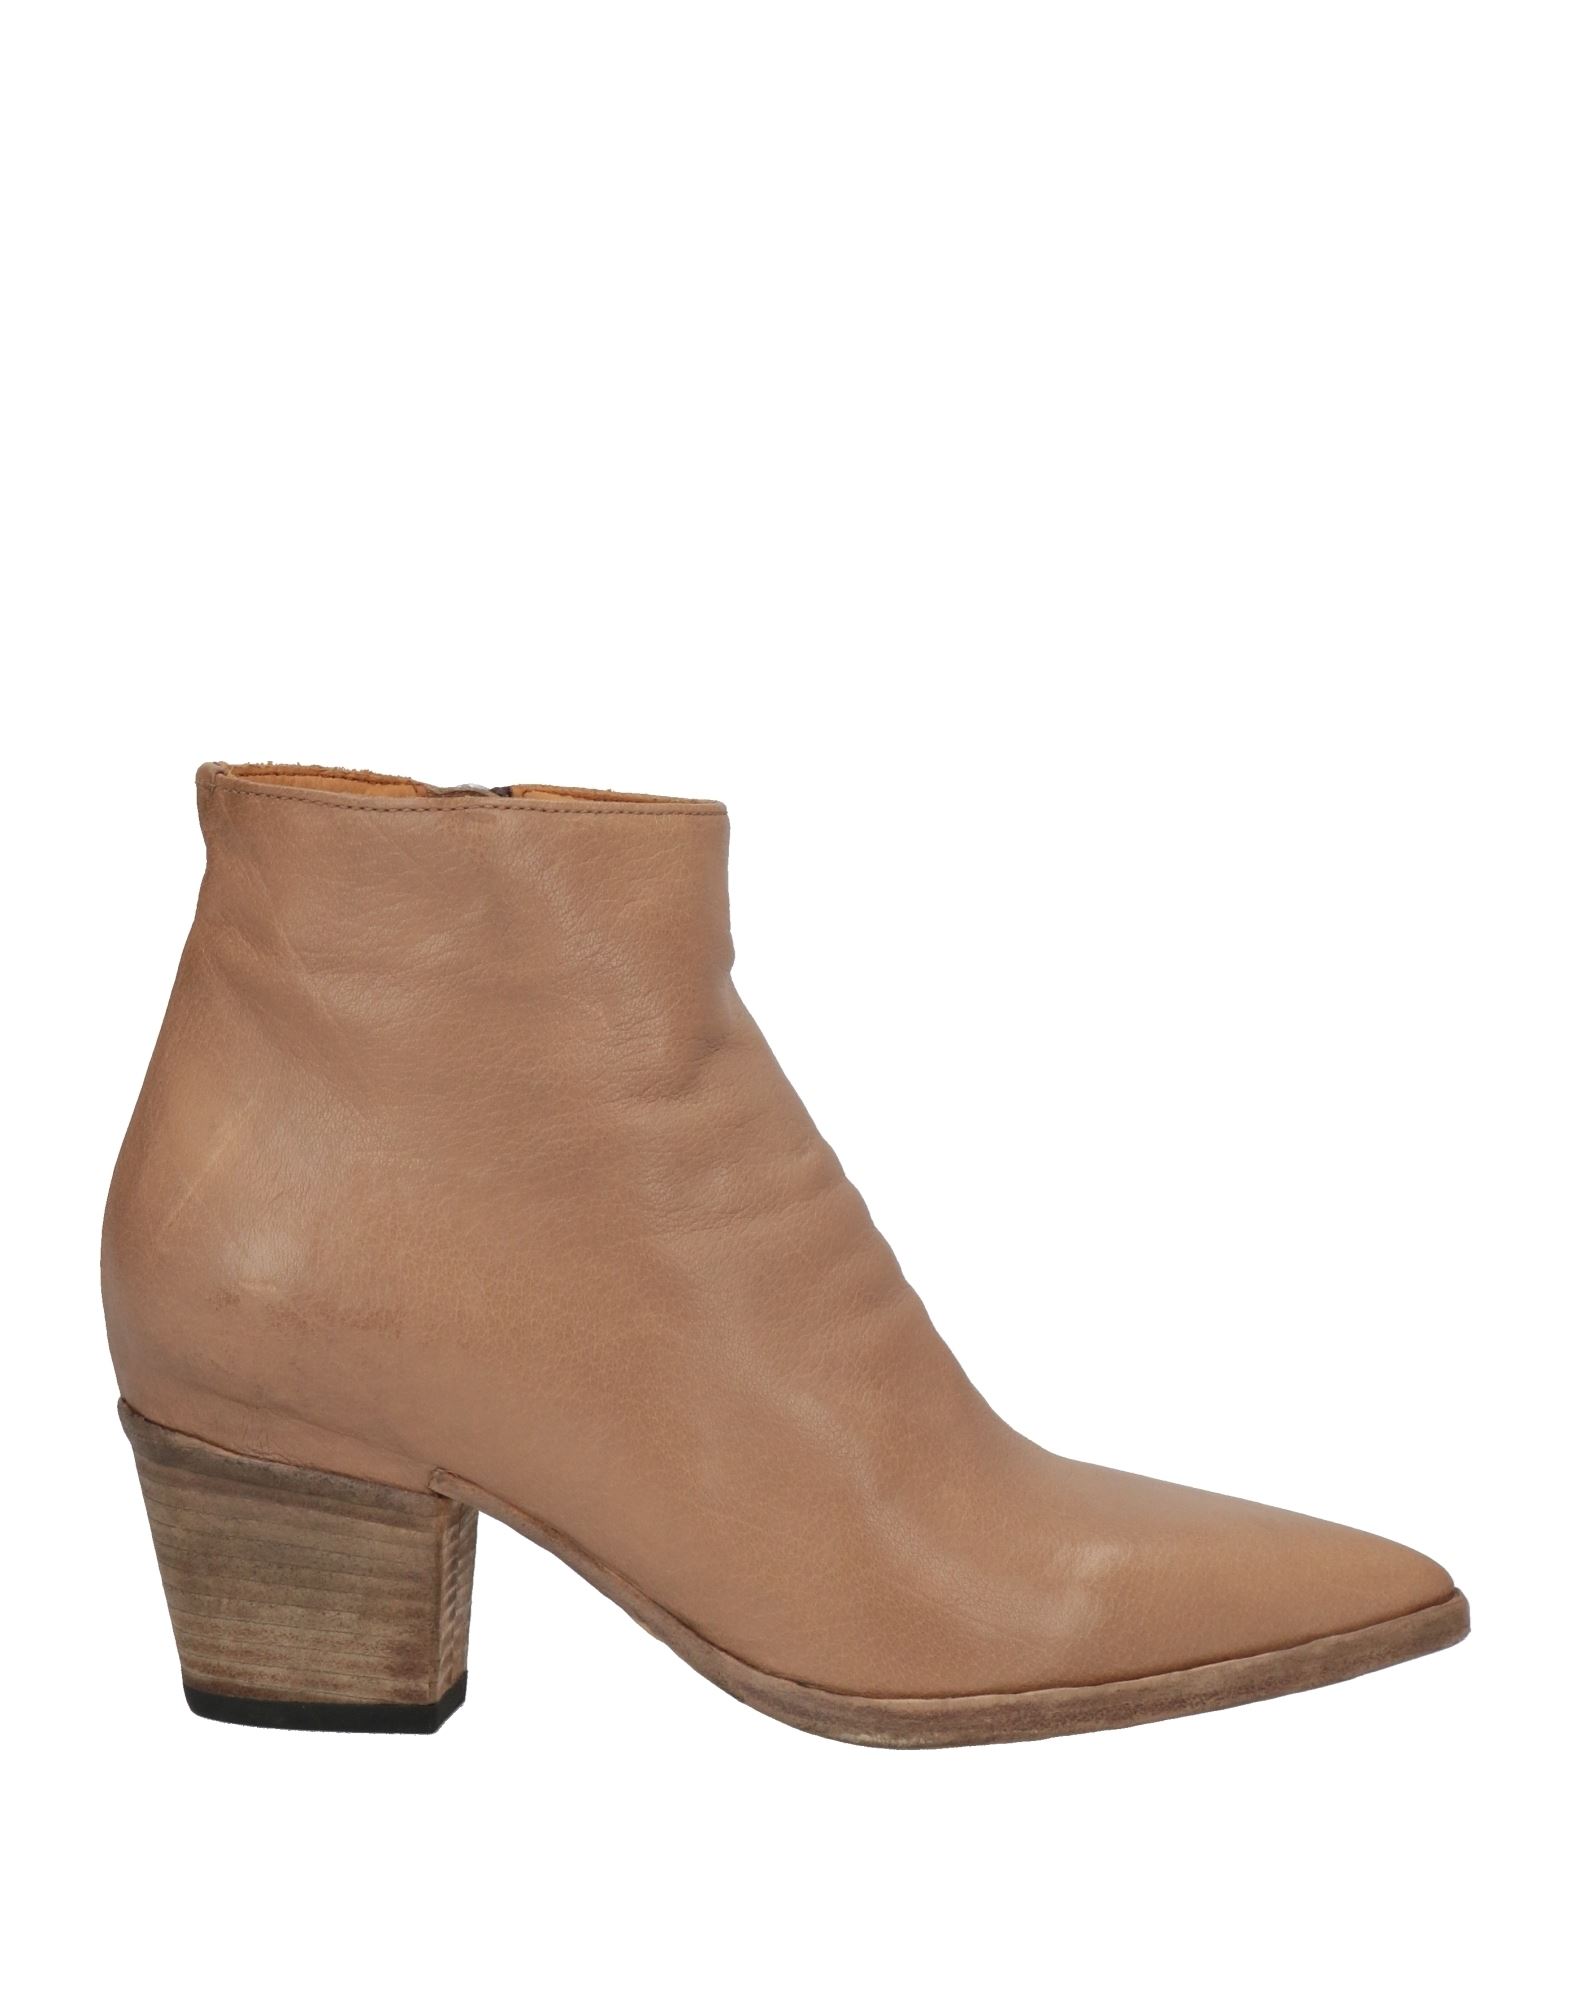 OFFICINE CREATIVE ITALIA OFFICINE CREATIVE ITALIA WOMAN ANKLE BOOTS LIGHT BROWN SIZE 10 SOFT LEATHER